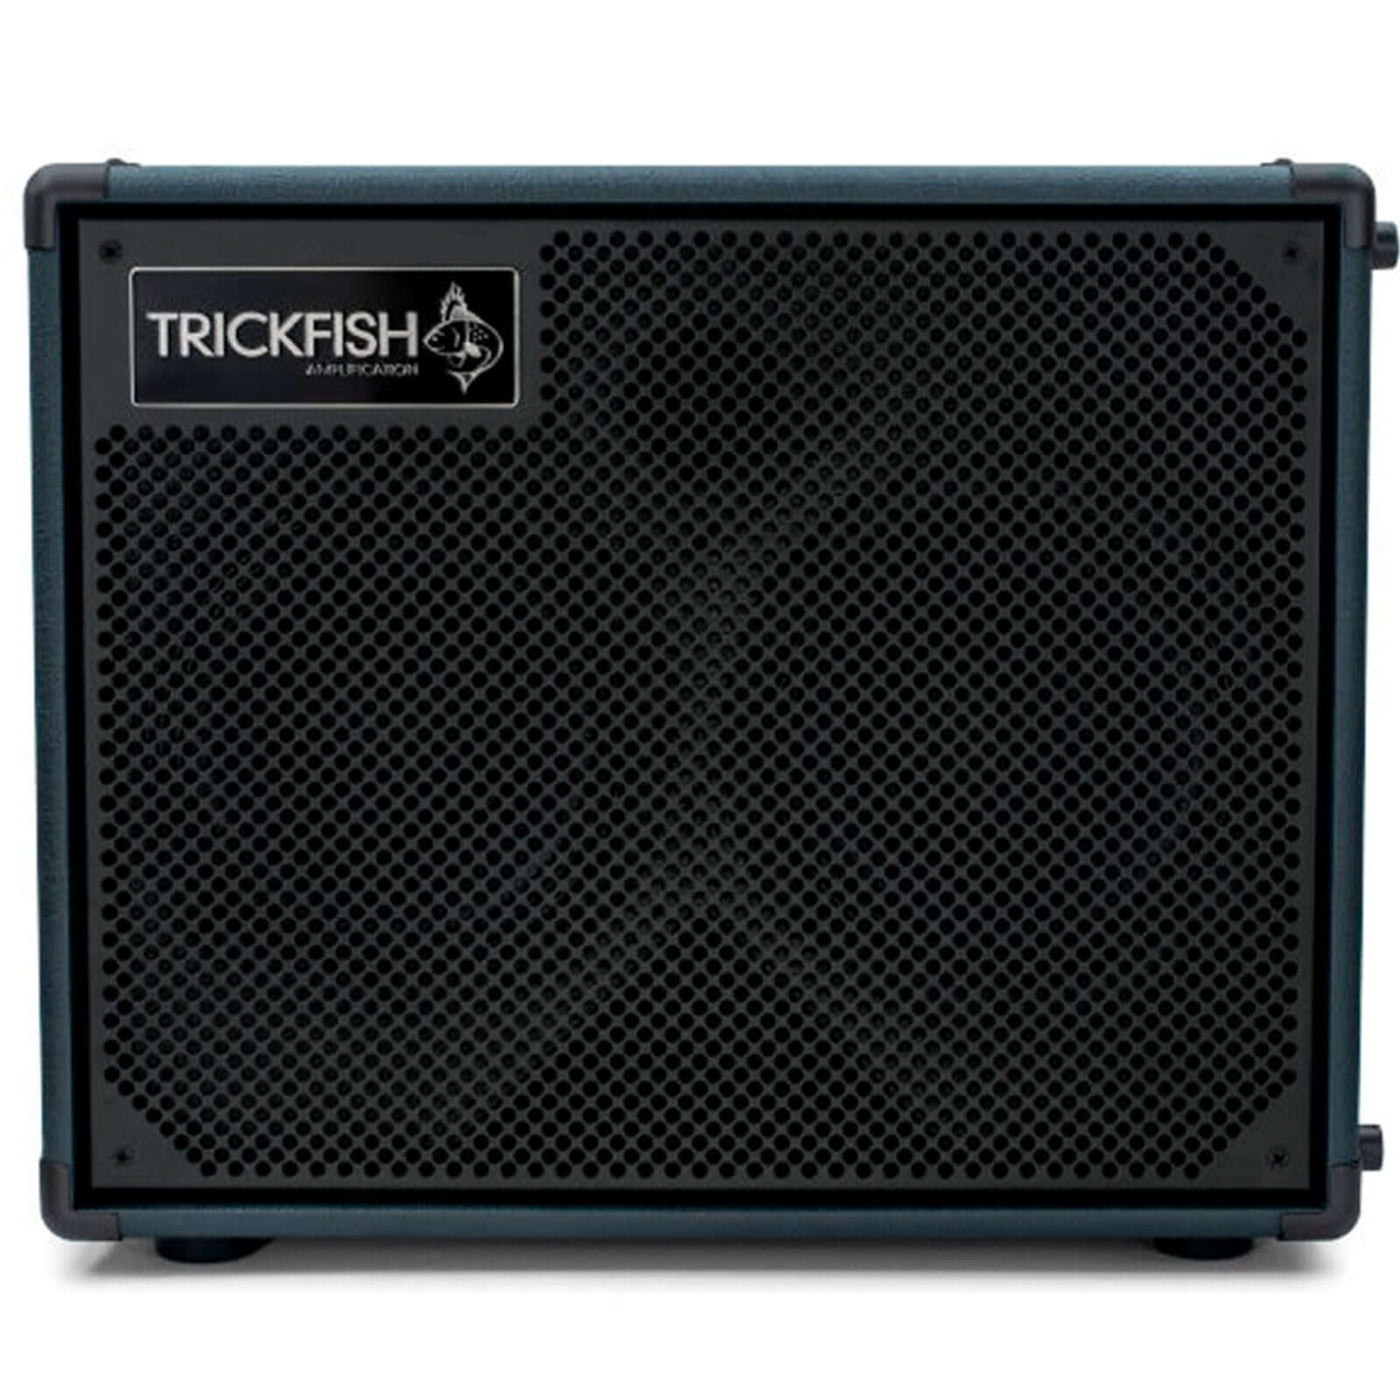 Trickfish TF208 - Don’t let the TF208’s pint-sized design fool you. It’s packed full of the same strength that makes the TF408 such a powerhouse. Utilizing the same custom Eminence® ferrite bass speakers, this 2 x 8″ compact bass cabinet delivers a tight